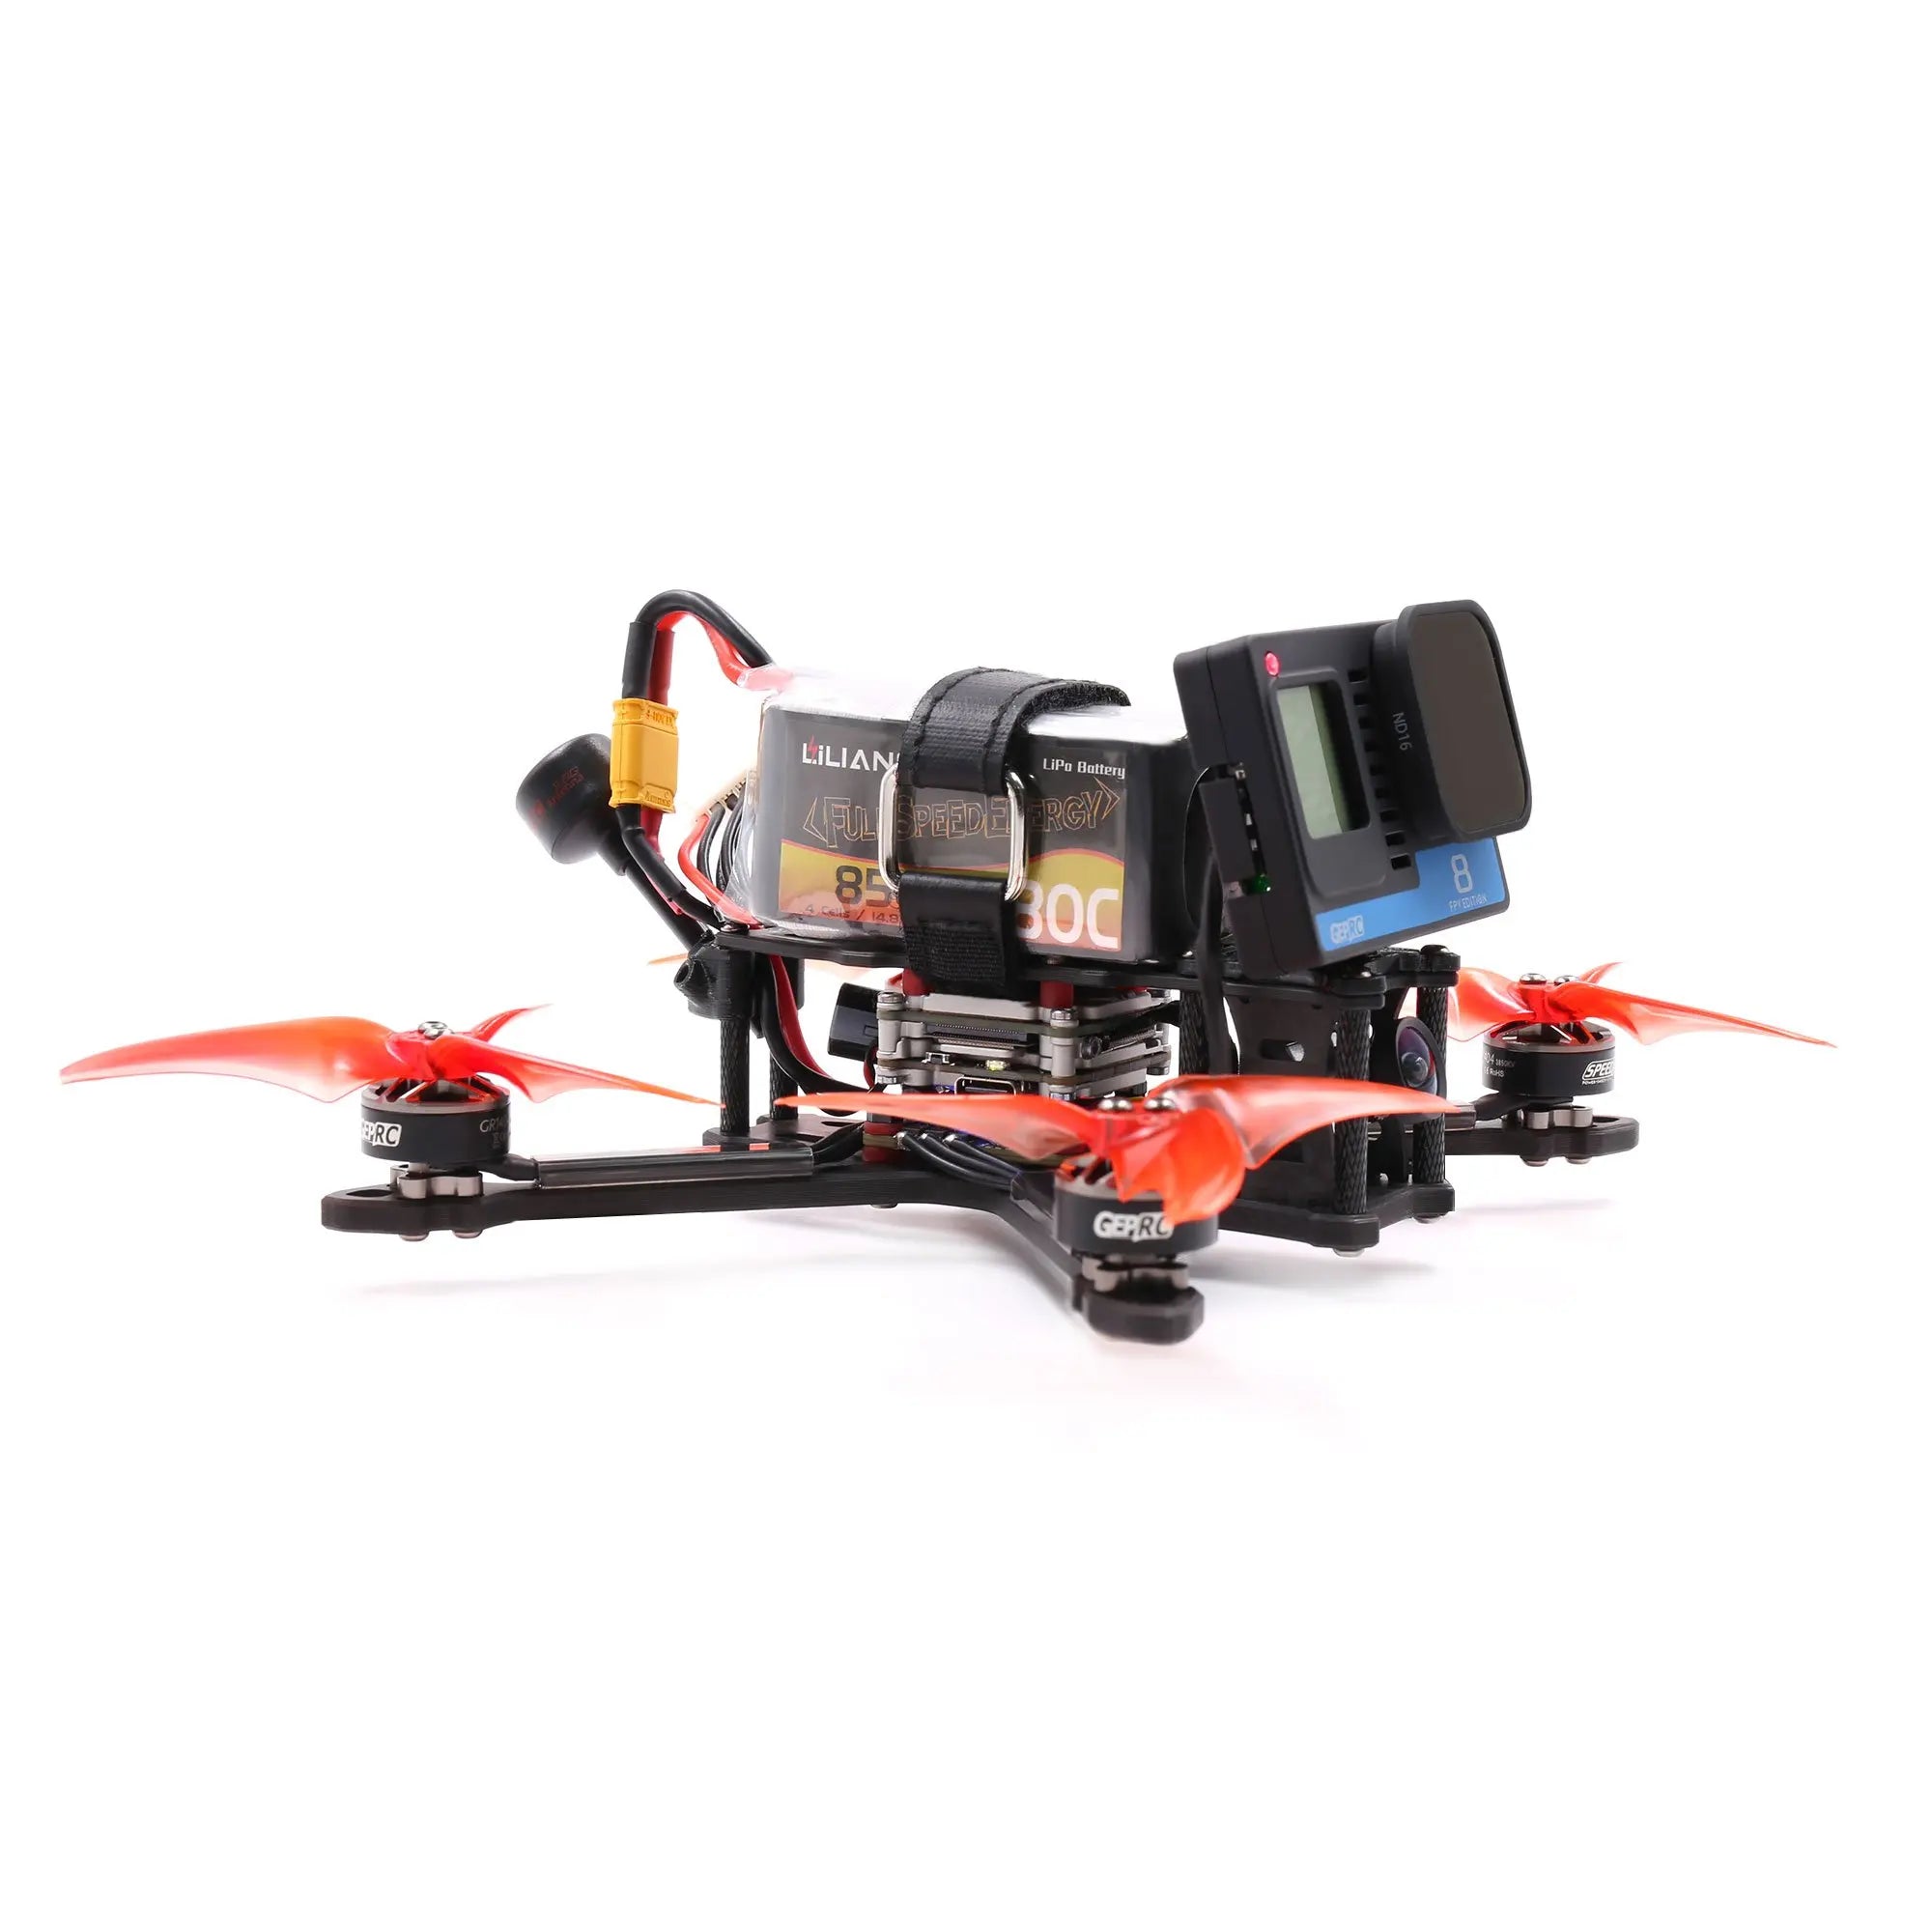 GEPRC SMART 35 FPV Drone, GEP-ST35 Wheelbase: 155mm Top plate thickness: 2.0mm Bottom plate